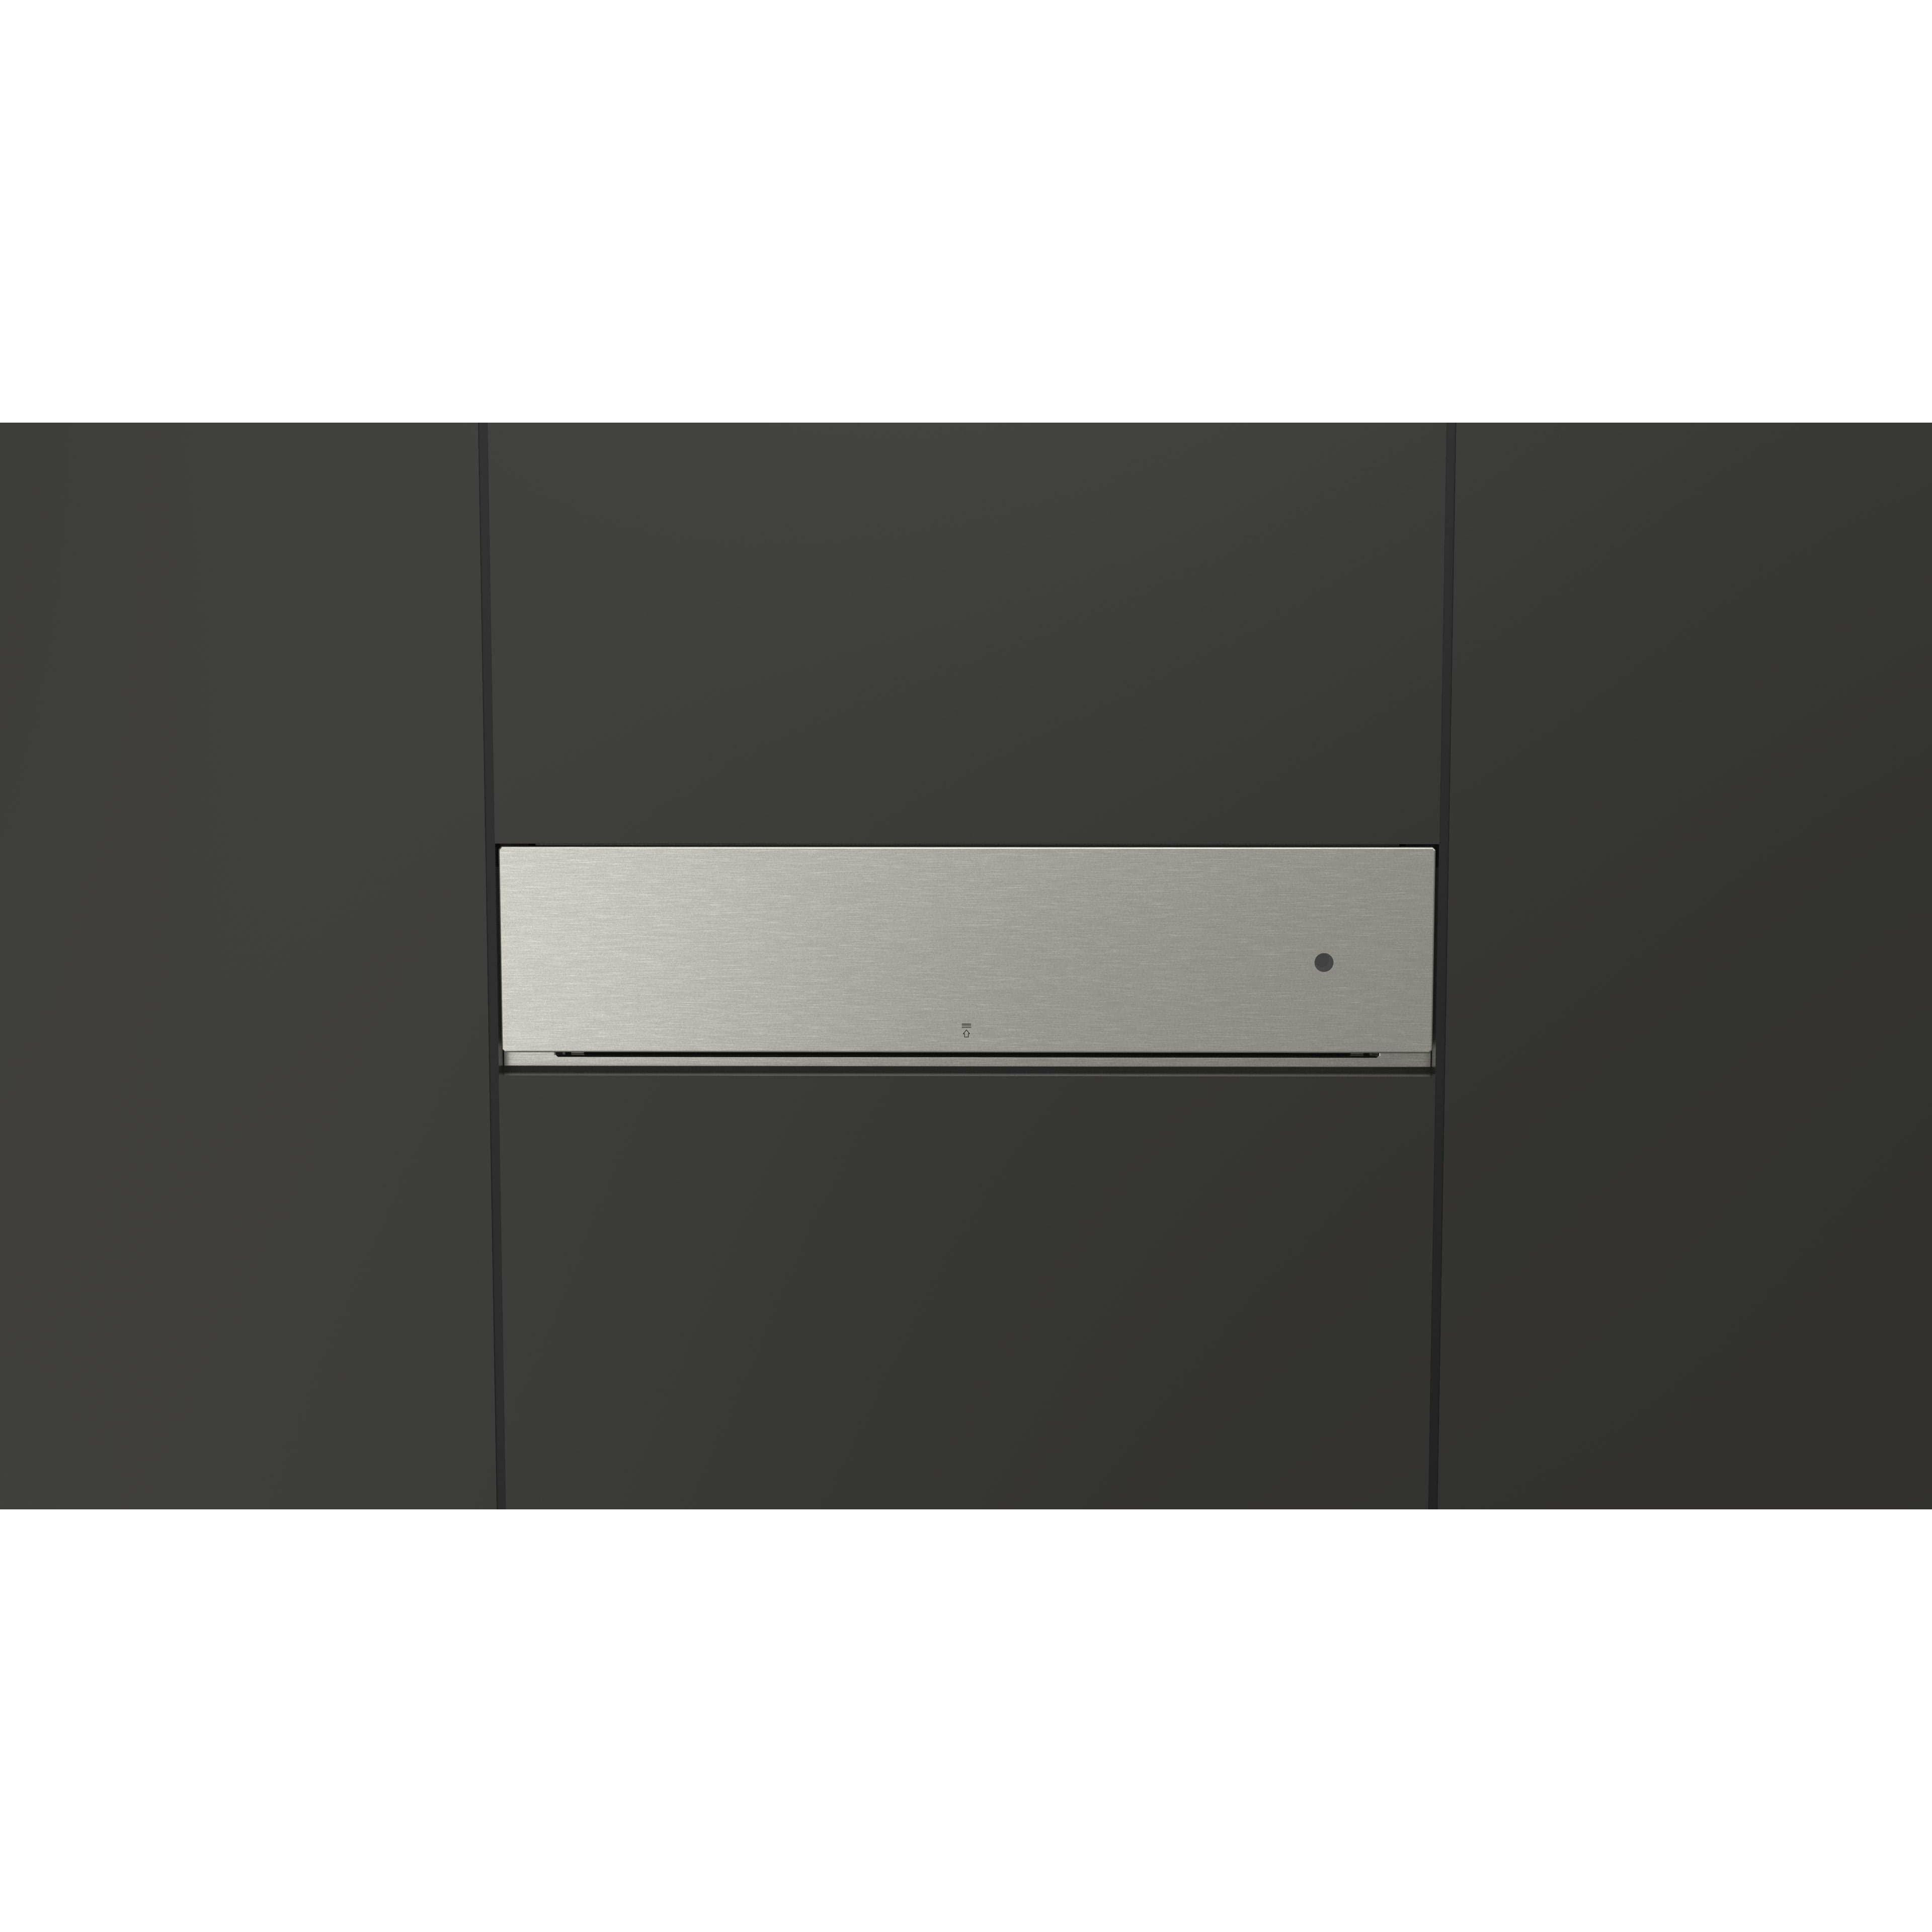 Fulgor Milano 24" Warming Drawer with .5 cu. ft. Capacity, Stainless Steel - F4DWD24S1 Warming Drawers F4DWD24S1 Luxury Appliances Direct